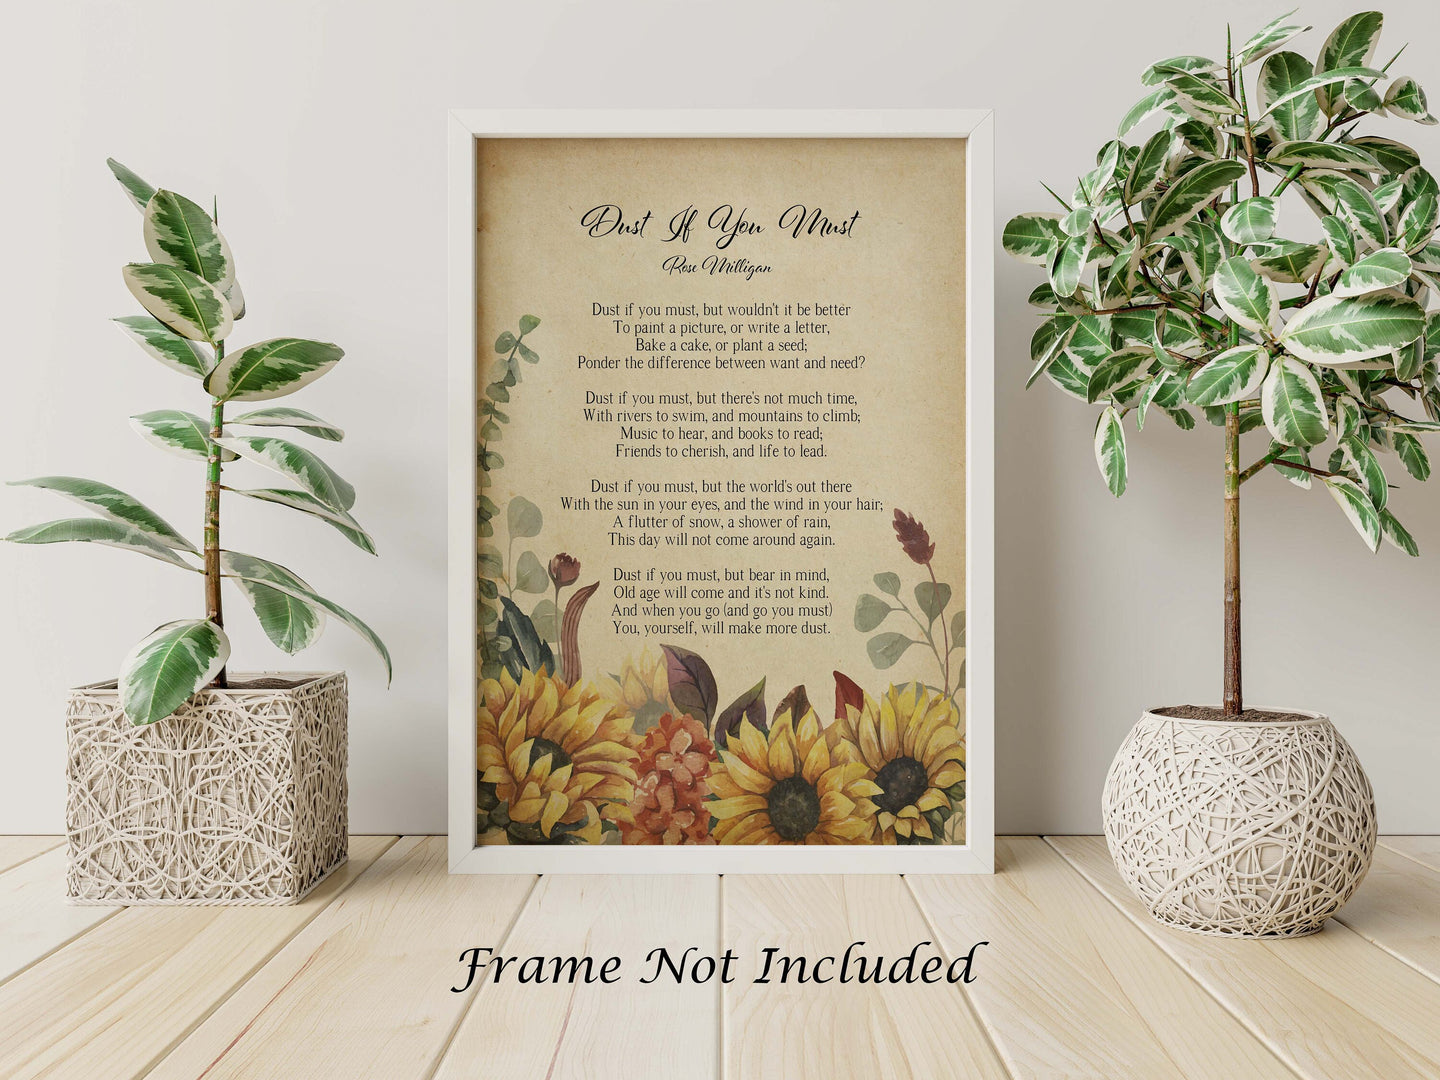 Dust If You Must - Cute Poem Poster Print - Illustrated Poetry - Poem Print by Rose Milligan - Physical Art Print Without Frame